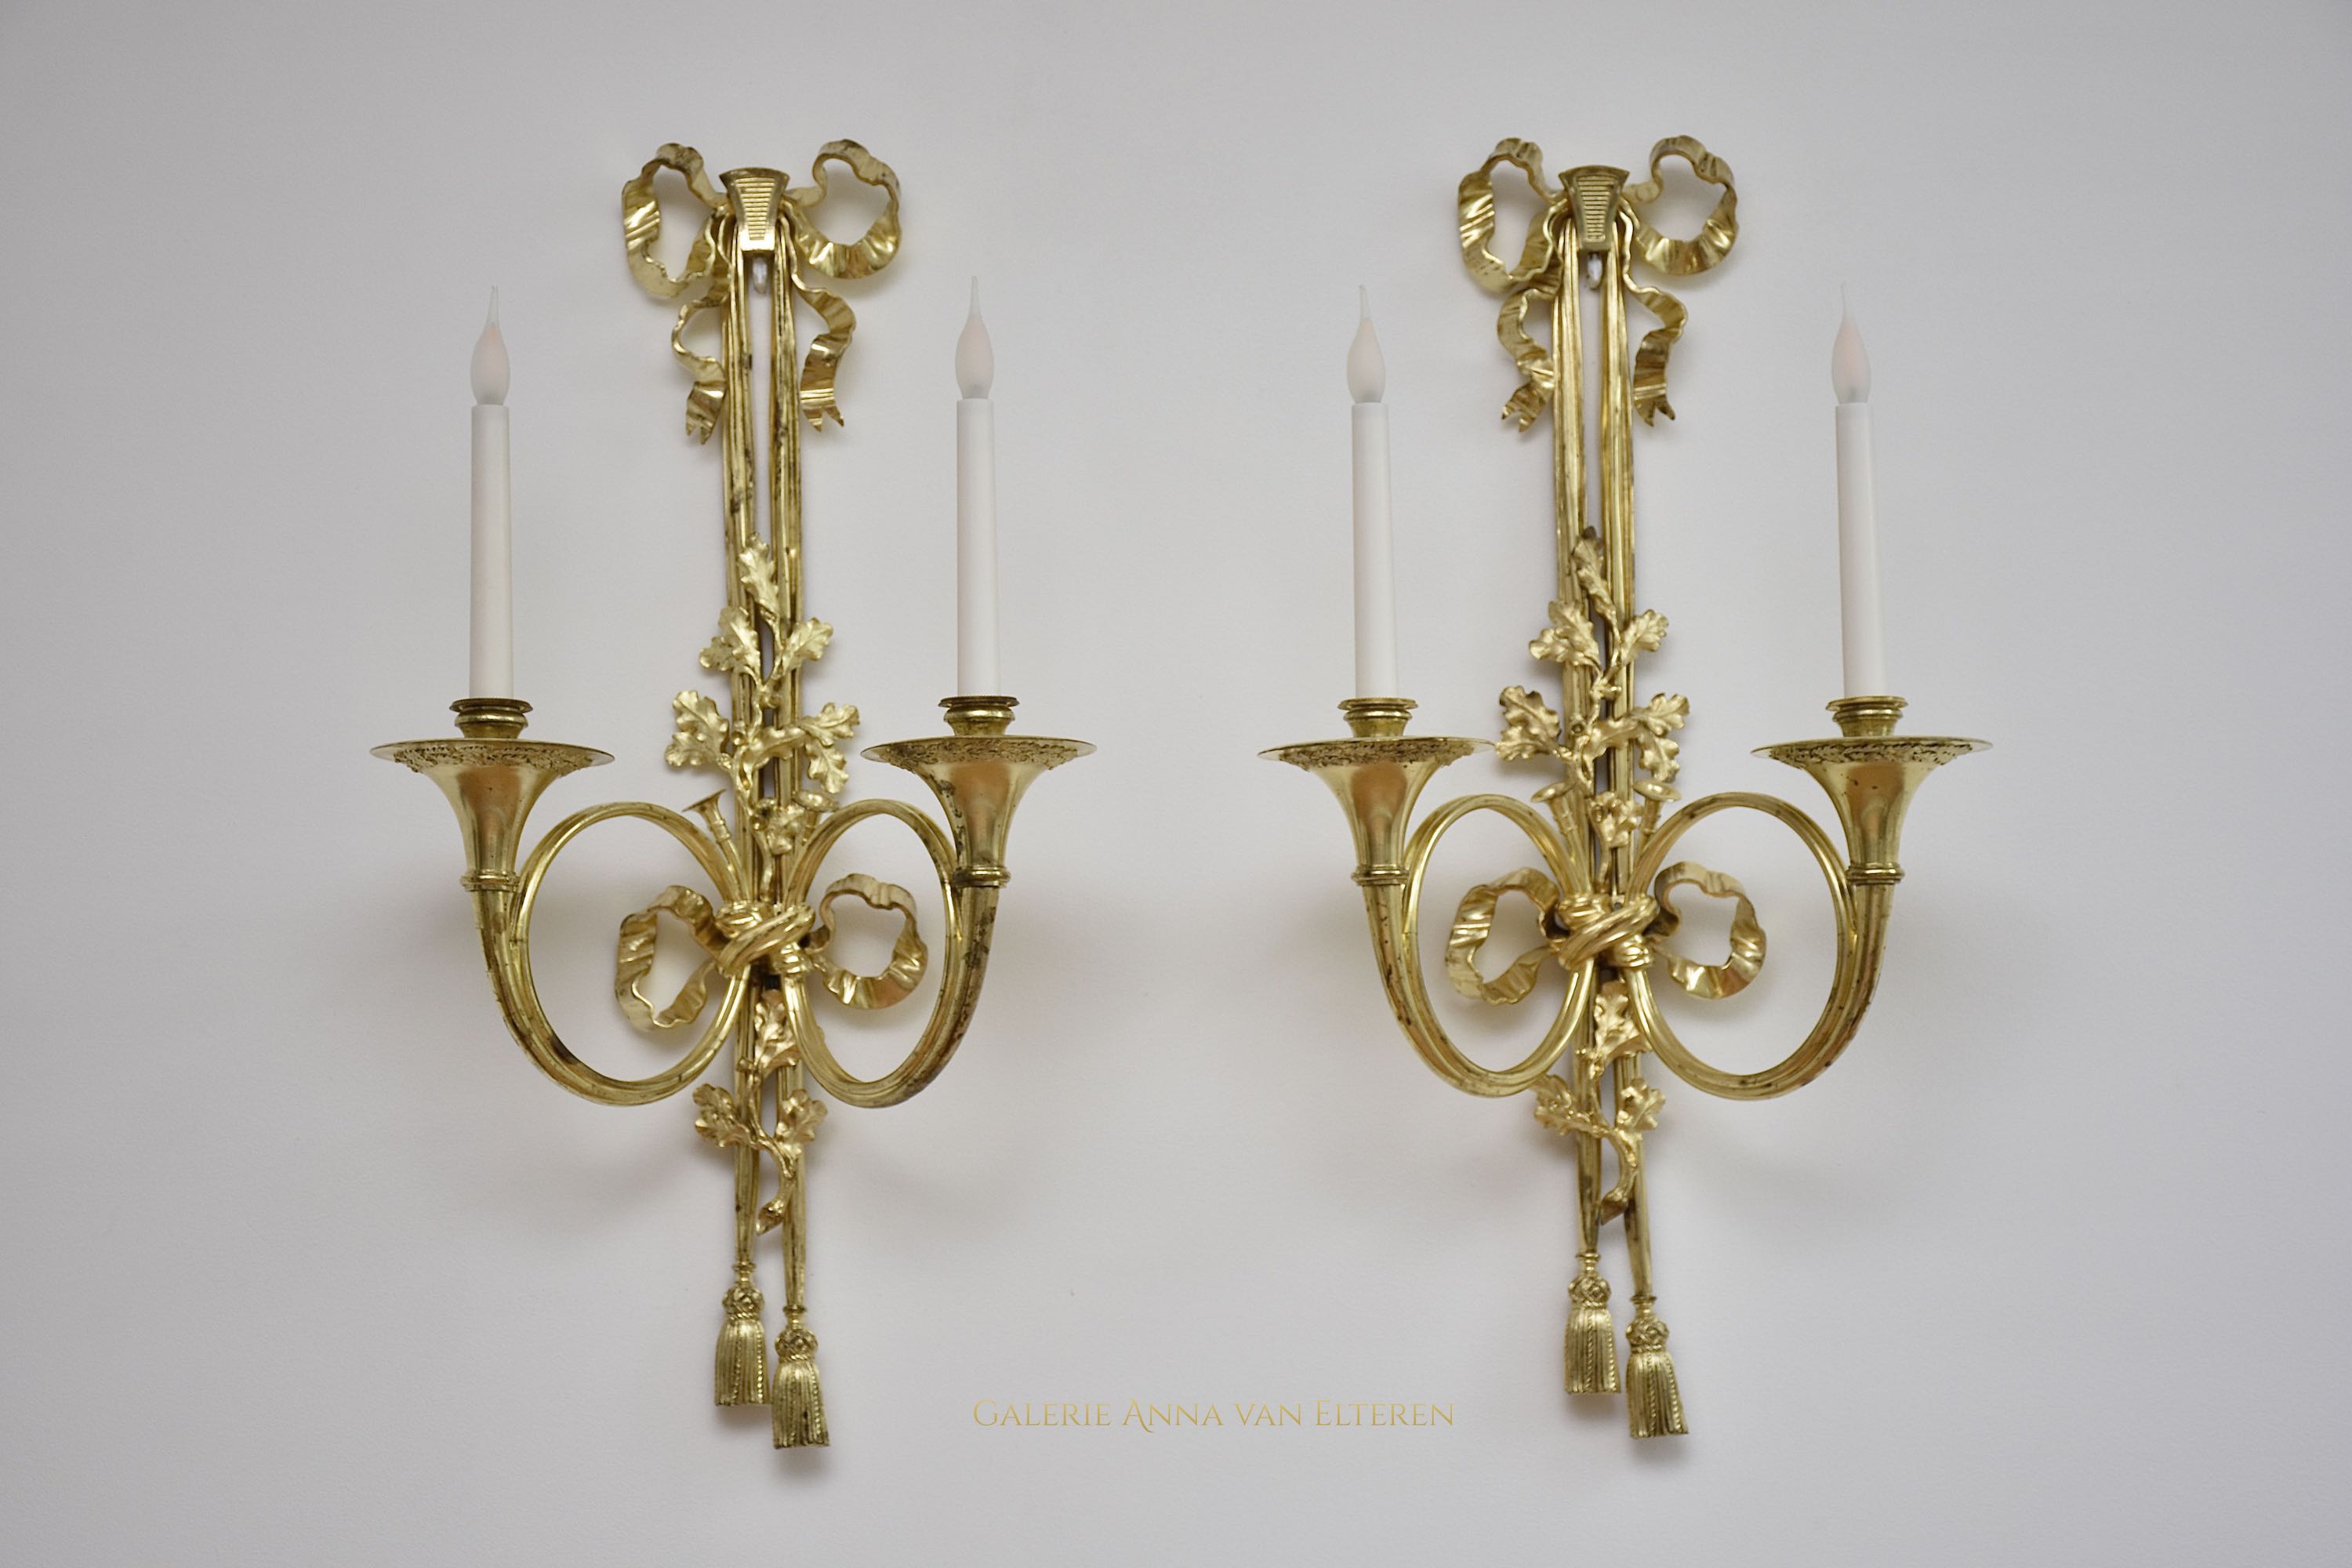 19th c. large pair of gilt bronze wall lights in the style of Louis XVI